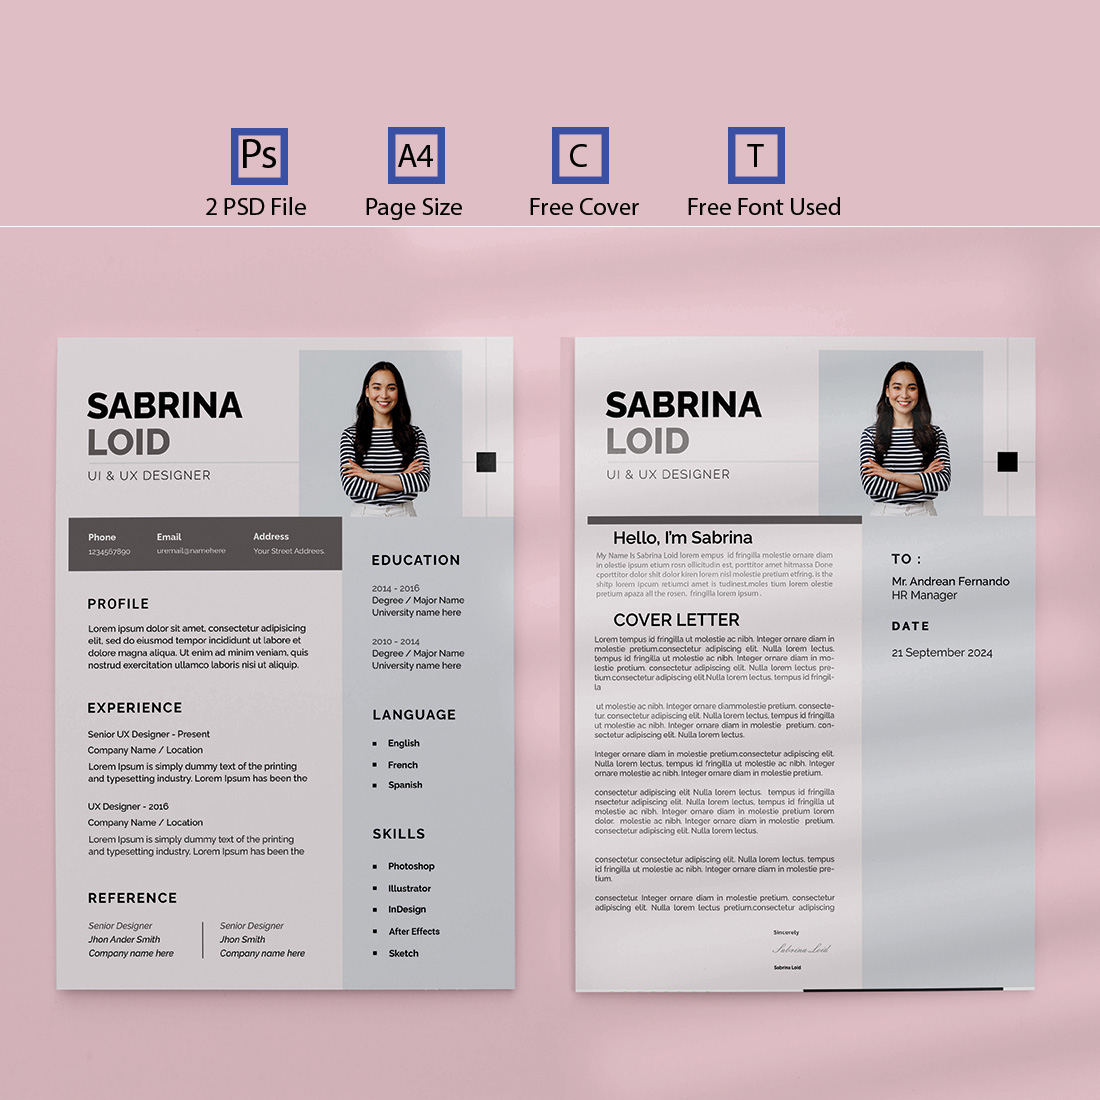 Two pages of a professional resume on a pink background.